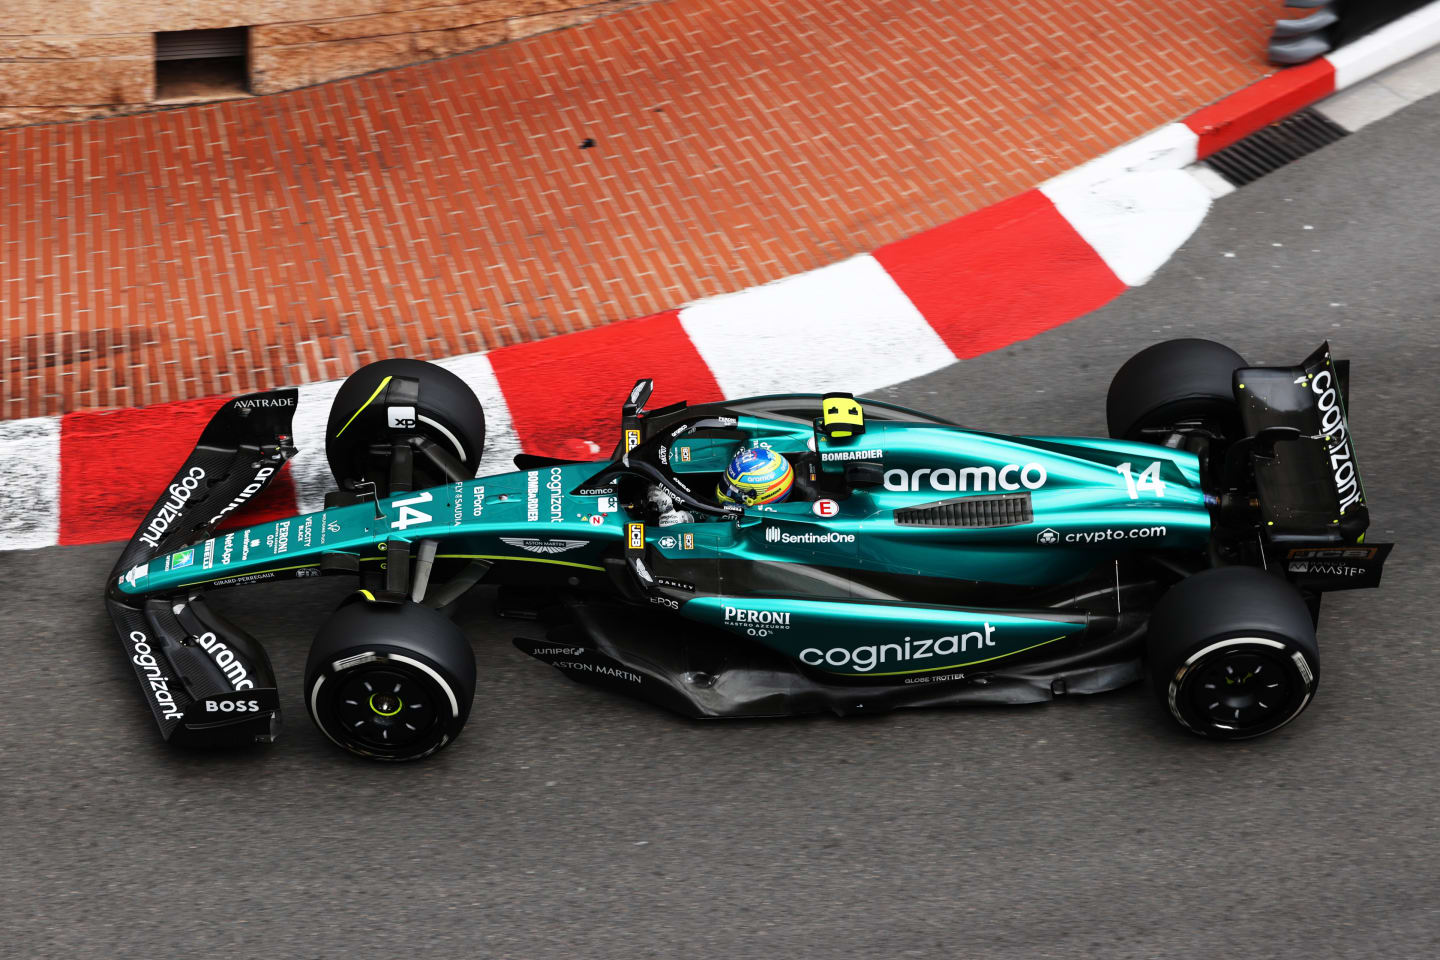 MONTE-CARLO, MONACO - MAY 28: Fernando Alonso of Spain driving the (14) Aston Martin AMR23 Mercedes